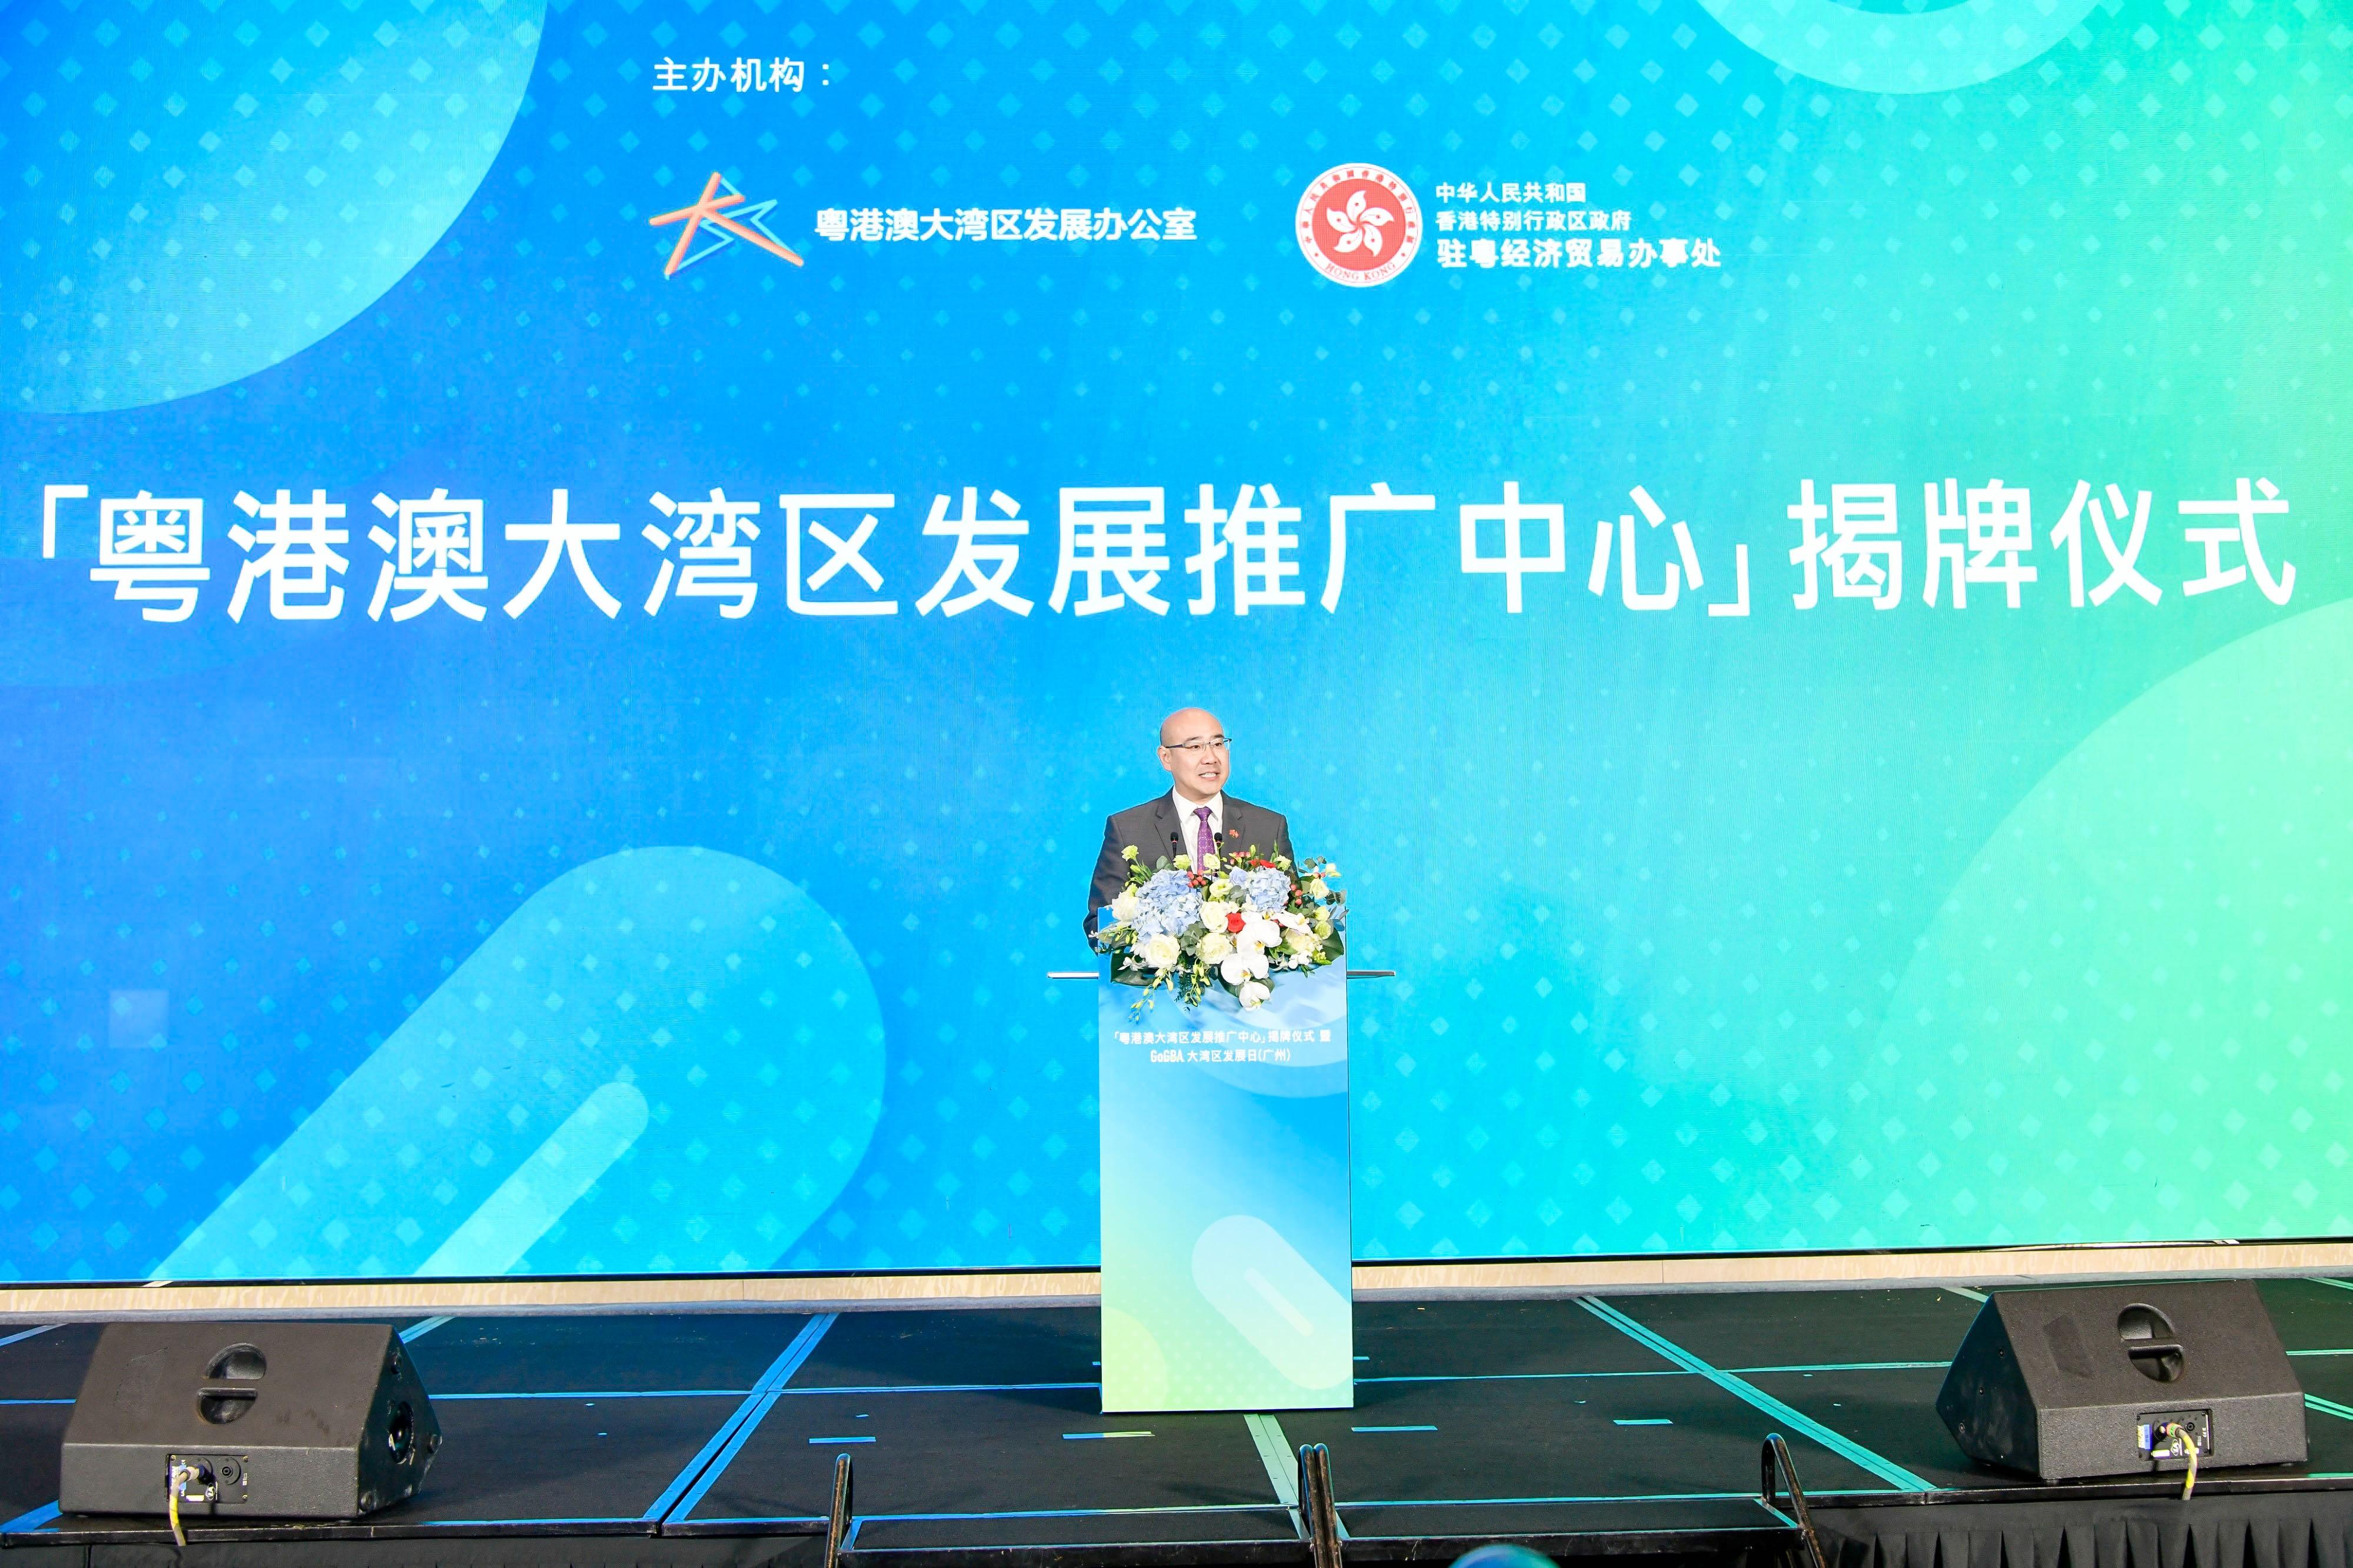 The Acting Commissioner for the Development of the Guangdong-Hong Kong-Macao Greater Bay Area, Mr Benjamin Mok, speaks at the plaque unveiling ceremony of the Guangdong-Hong Kong-Macao Greater Bay Area Development Promotion Centre in Guangzhou today (April 26).